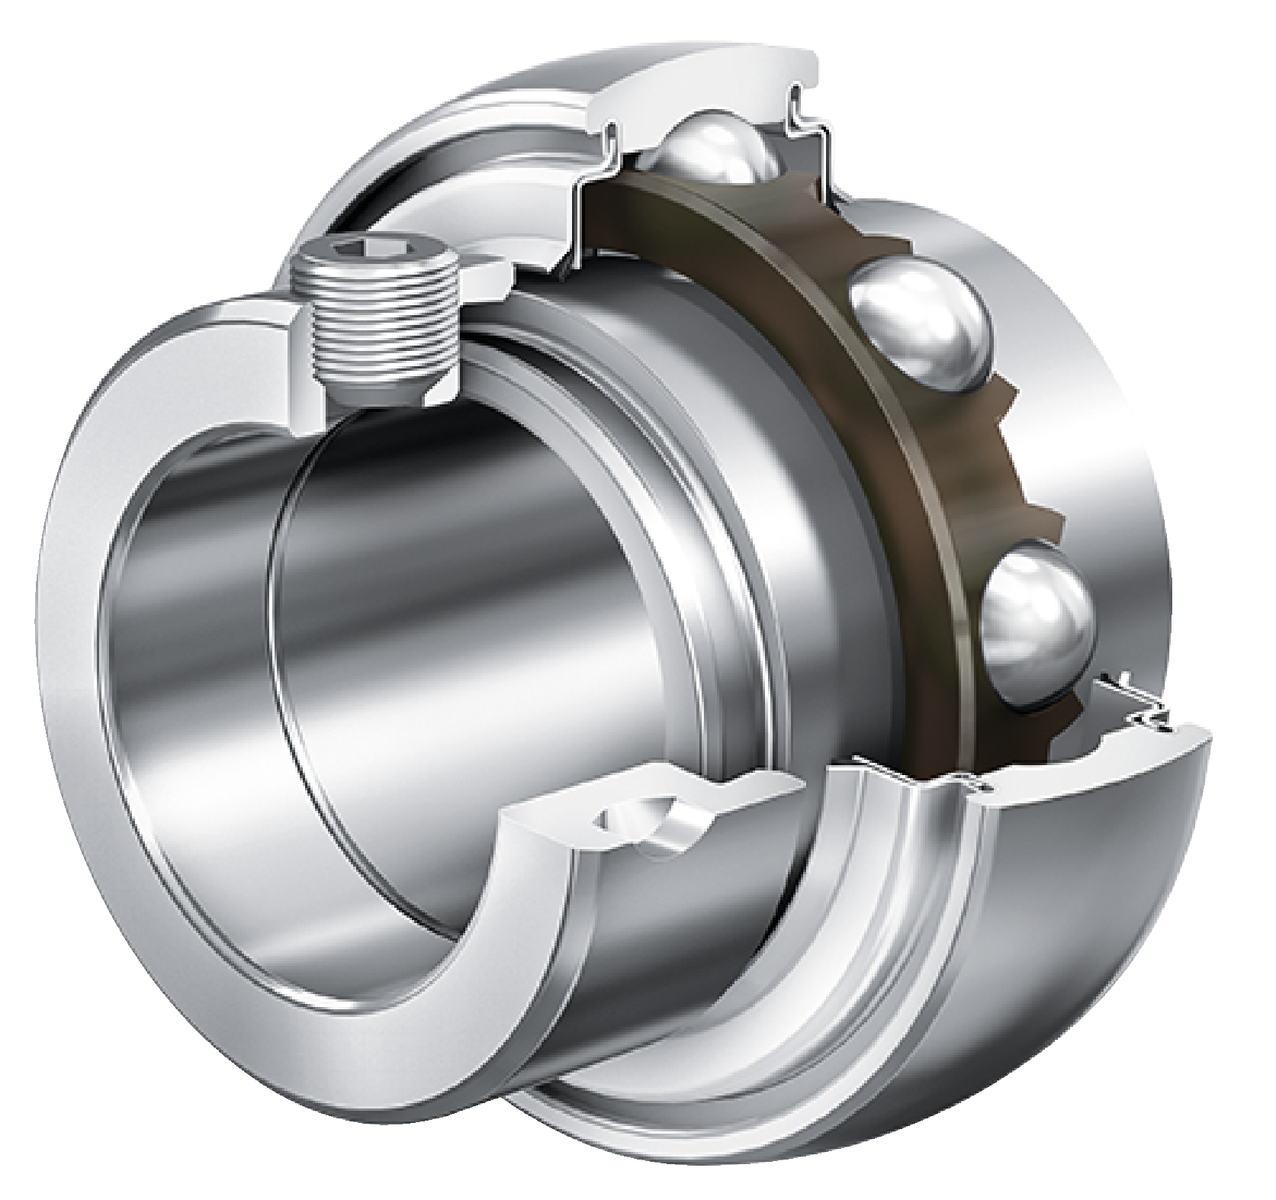 Radial Insert Ball Bearing E..-KRR-B, Spherical Outer Ring, Eccentric Locking Collar, R Seals on Both Sides